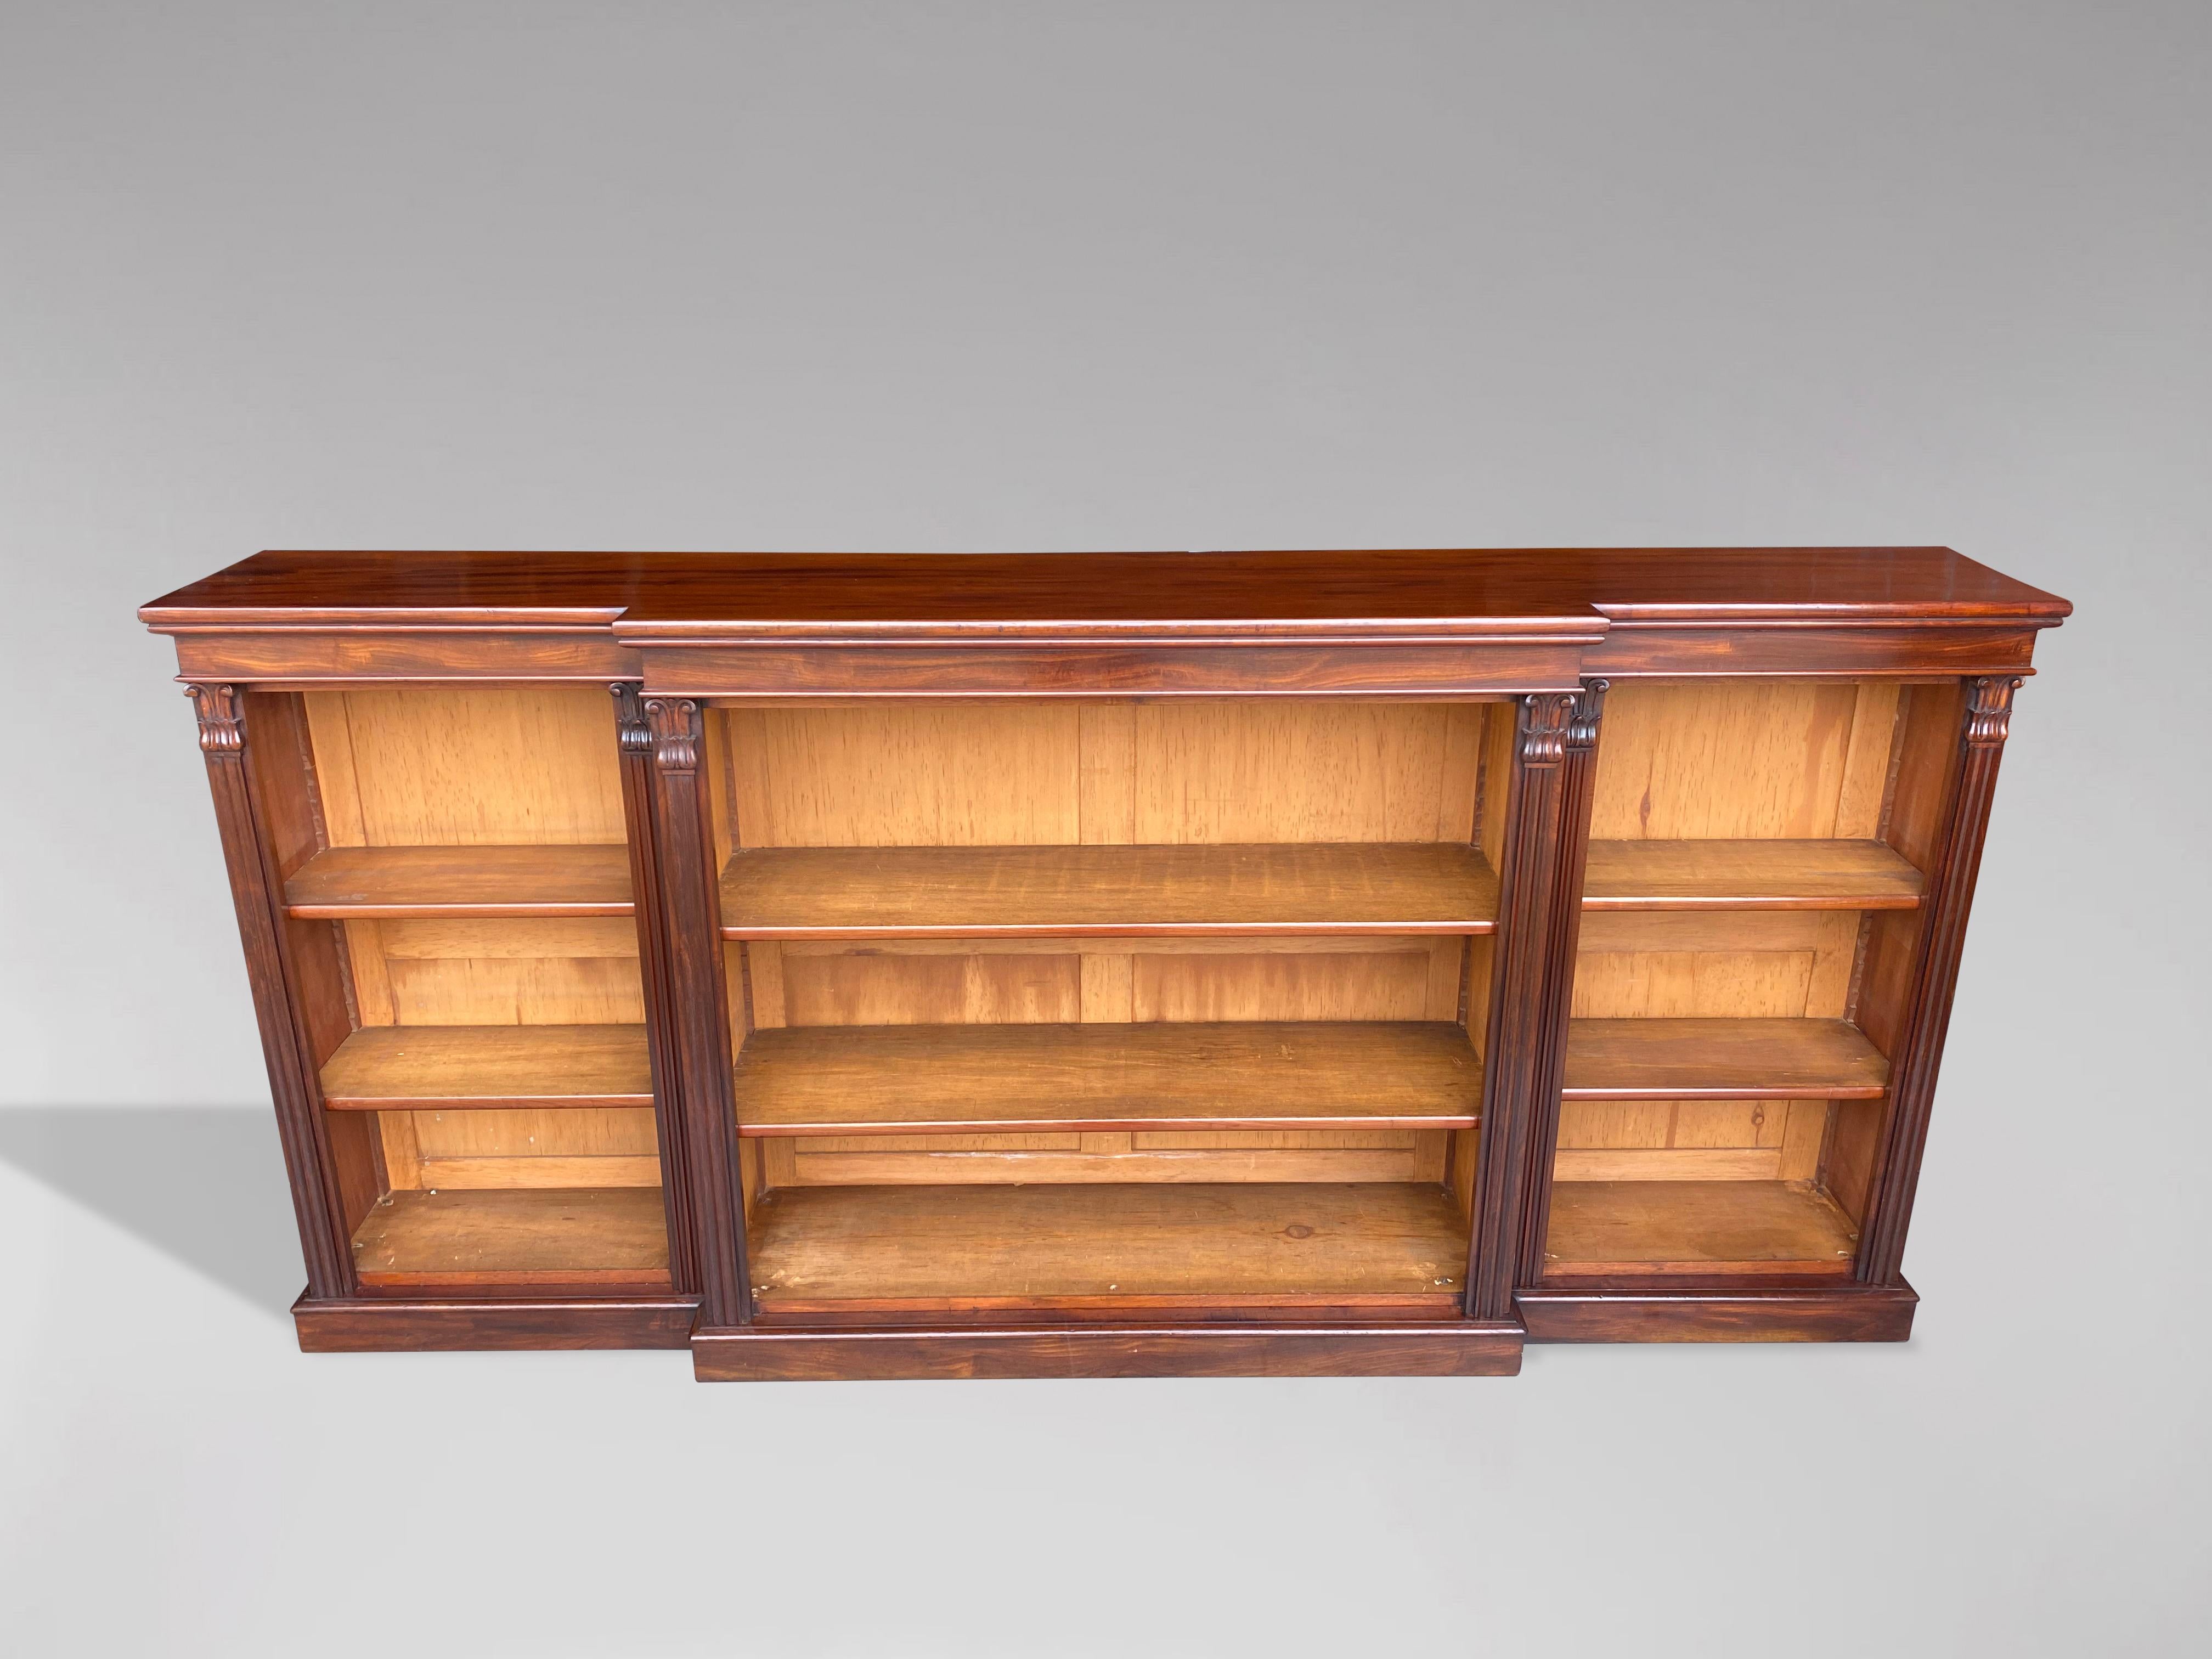 Hand-Crafted Large 19th Century Mahogany Open Breakfront Library Bookcase